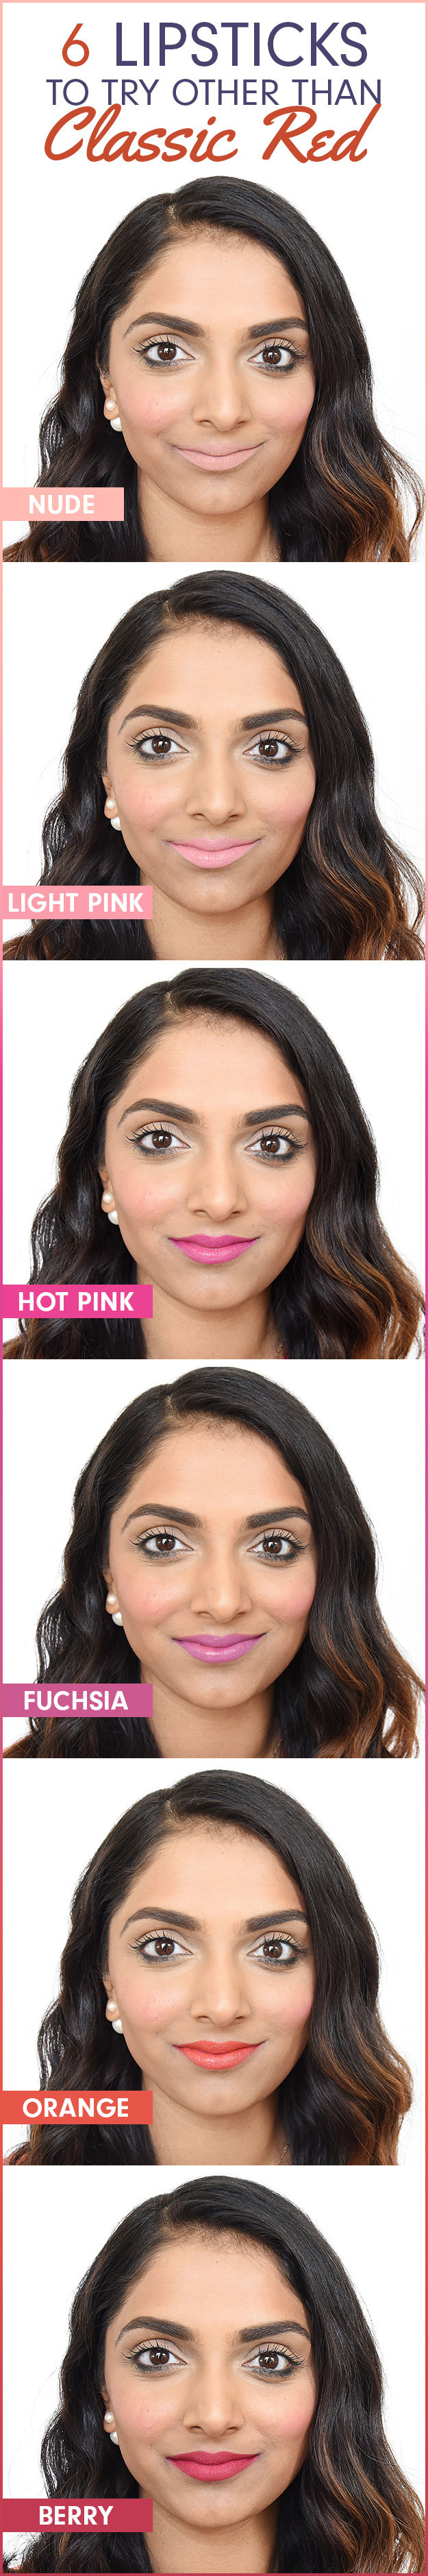 9 Ingenious Makeup Tips That Are Especially Useful For South Asian Women